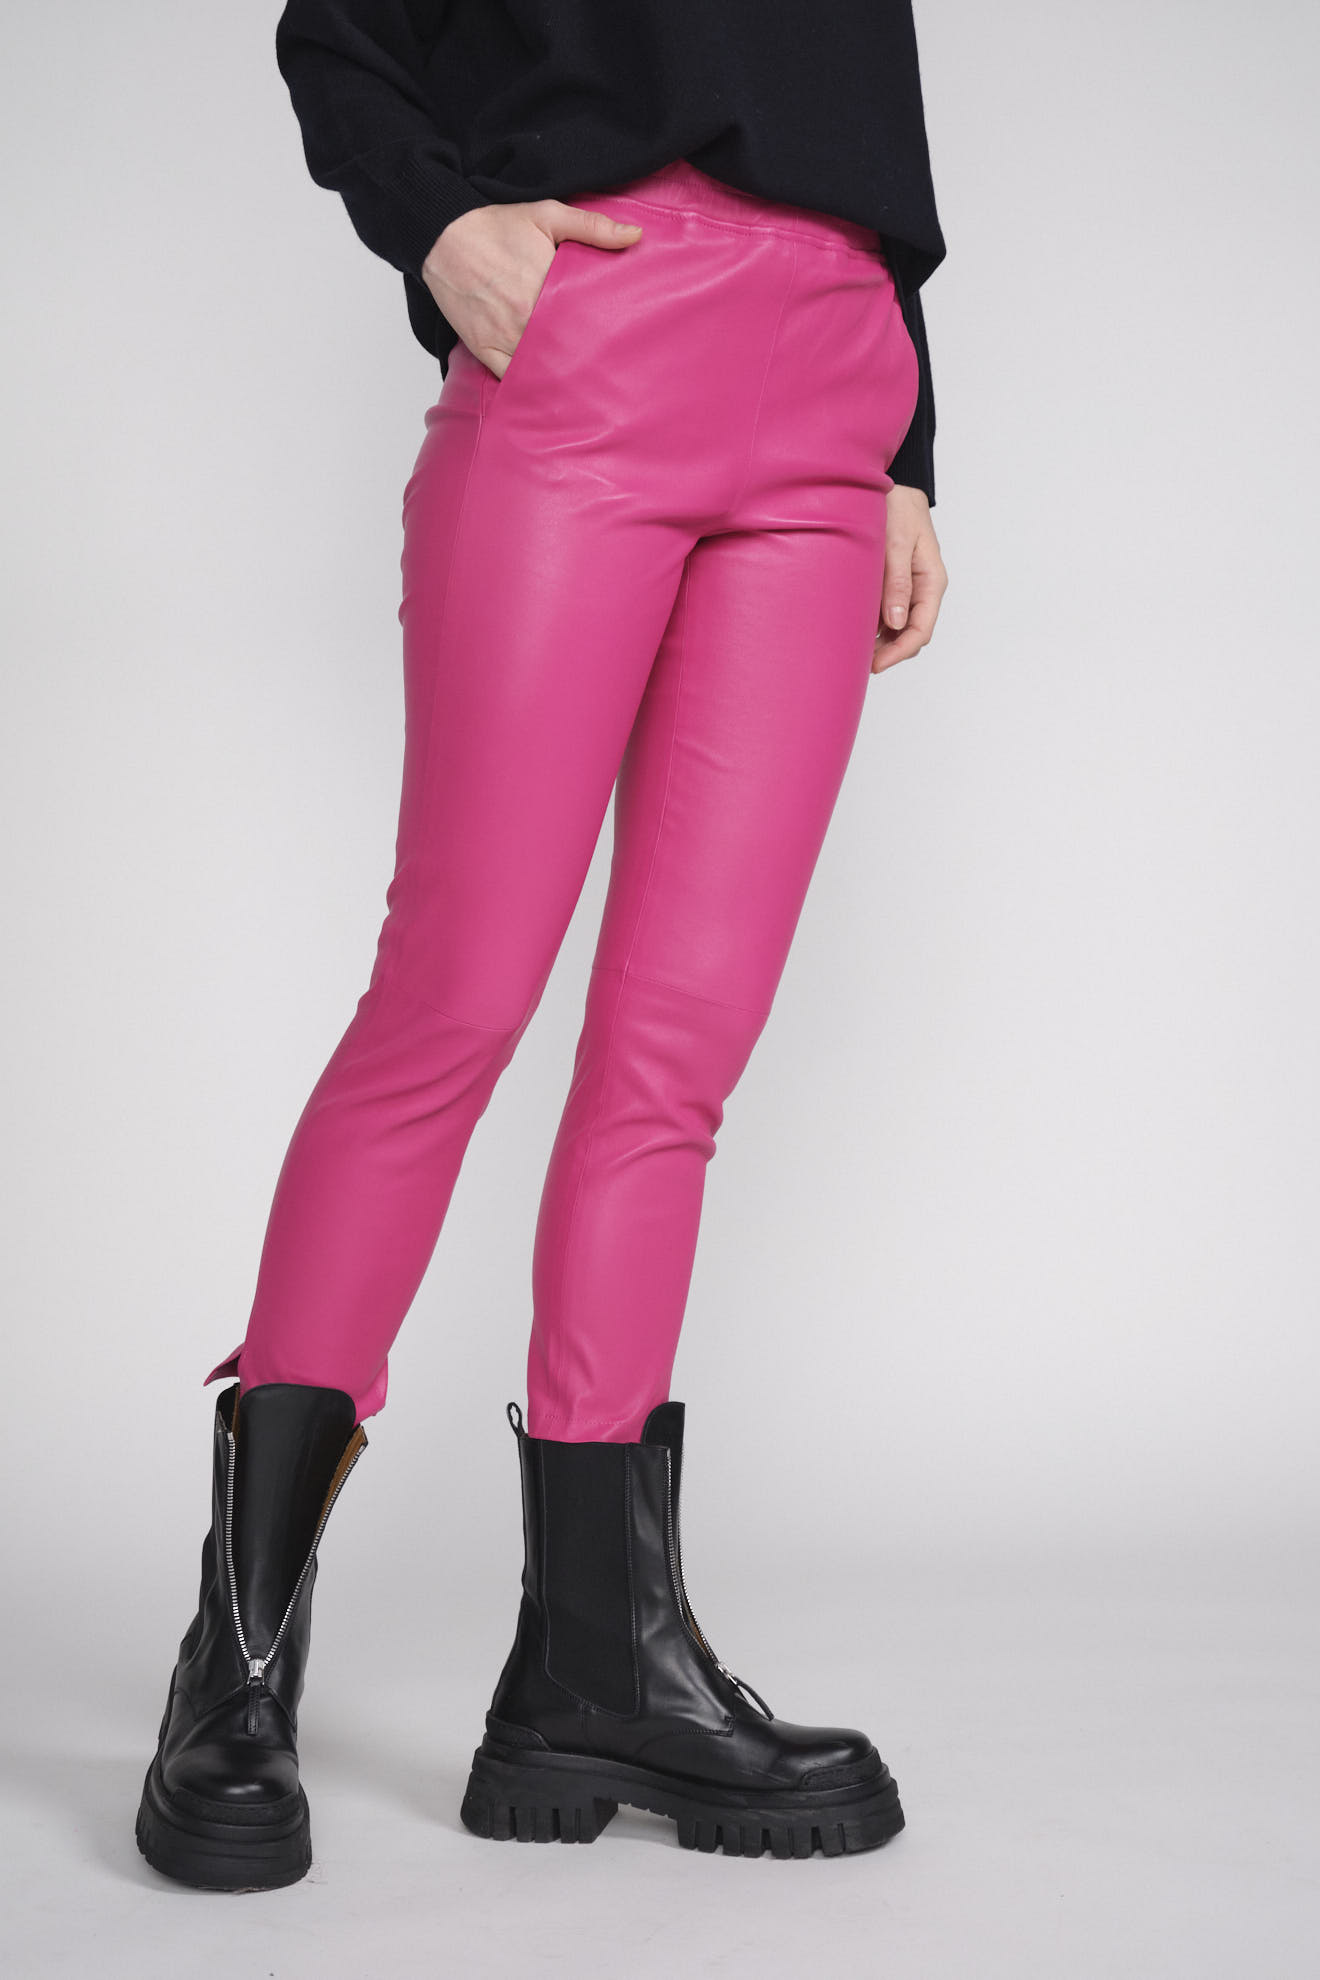 Arma Provence - bootcuts in lamb leather pink 38